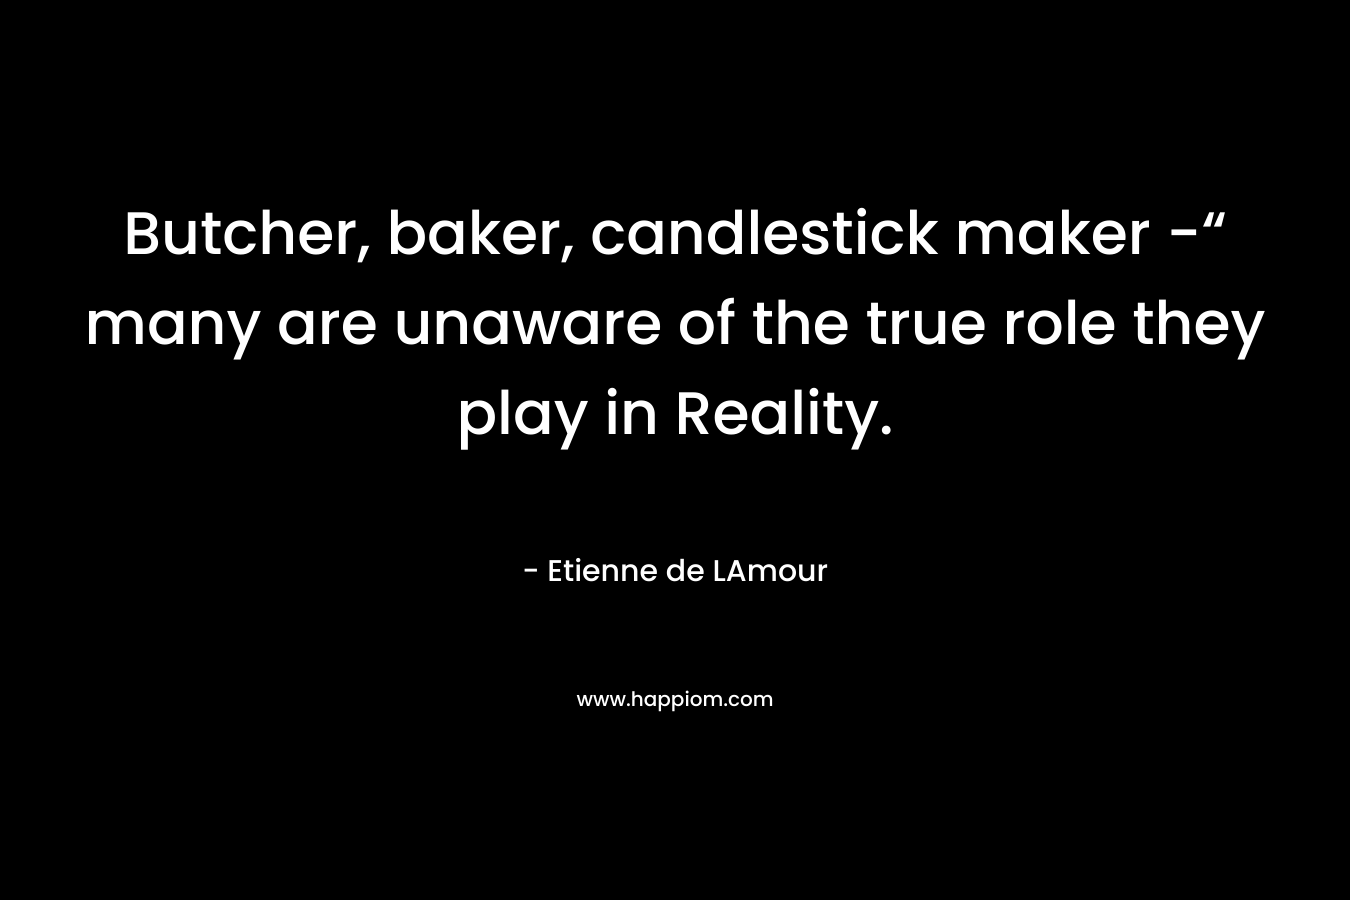 Butcher, baker, candlestick maker -“ many are unaware of the true role they play in Reality. – Etienne de LAmour